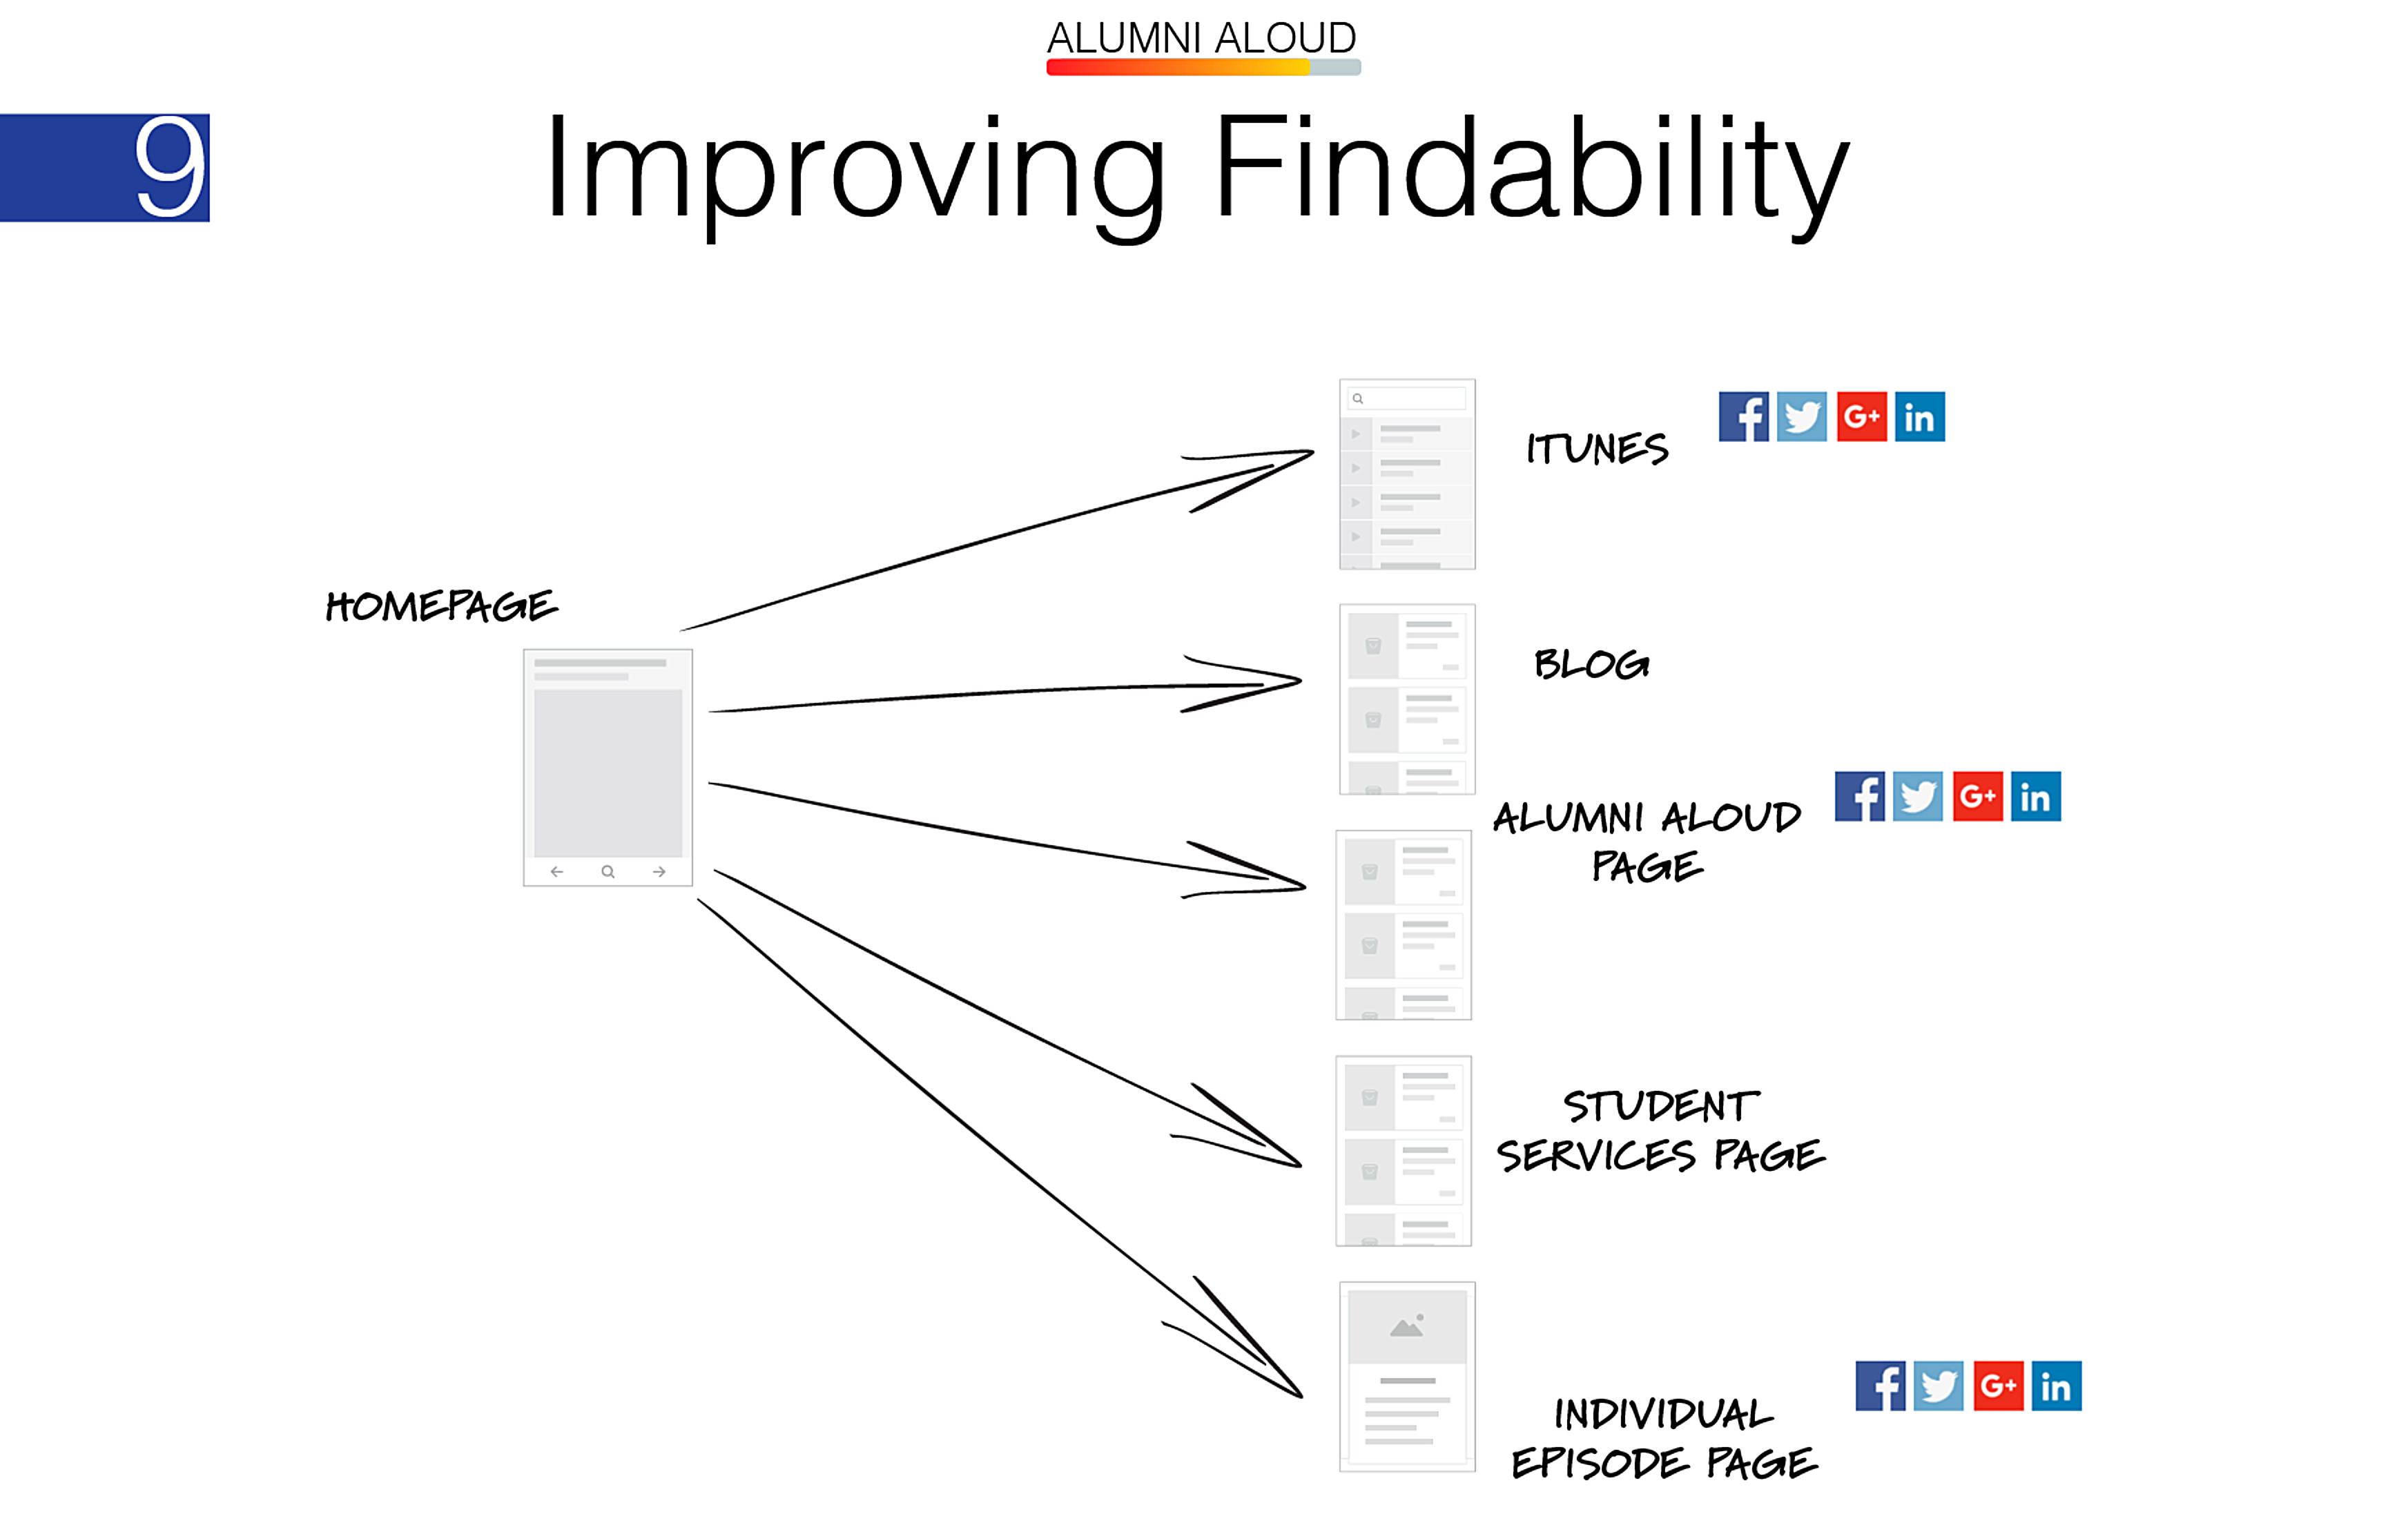 improving findability by creating different access points to the podcast on our website